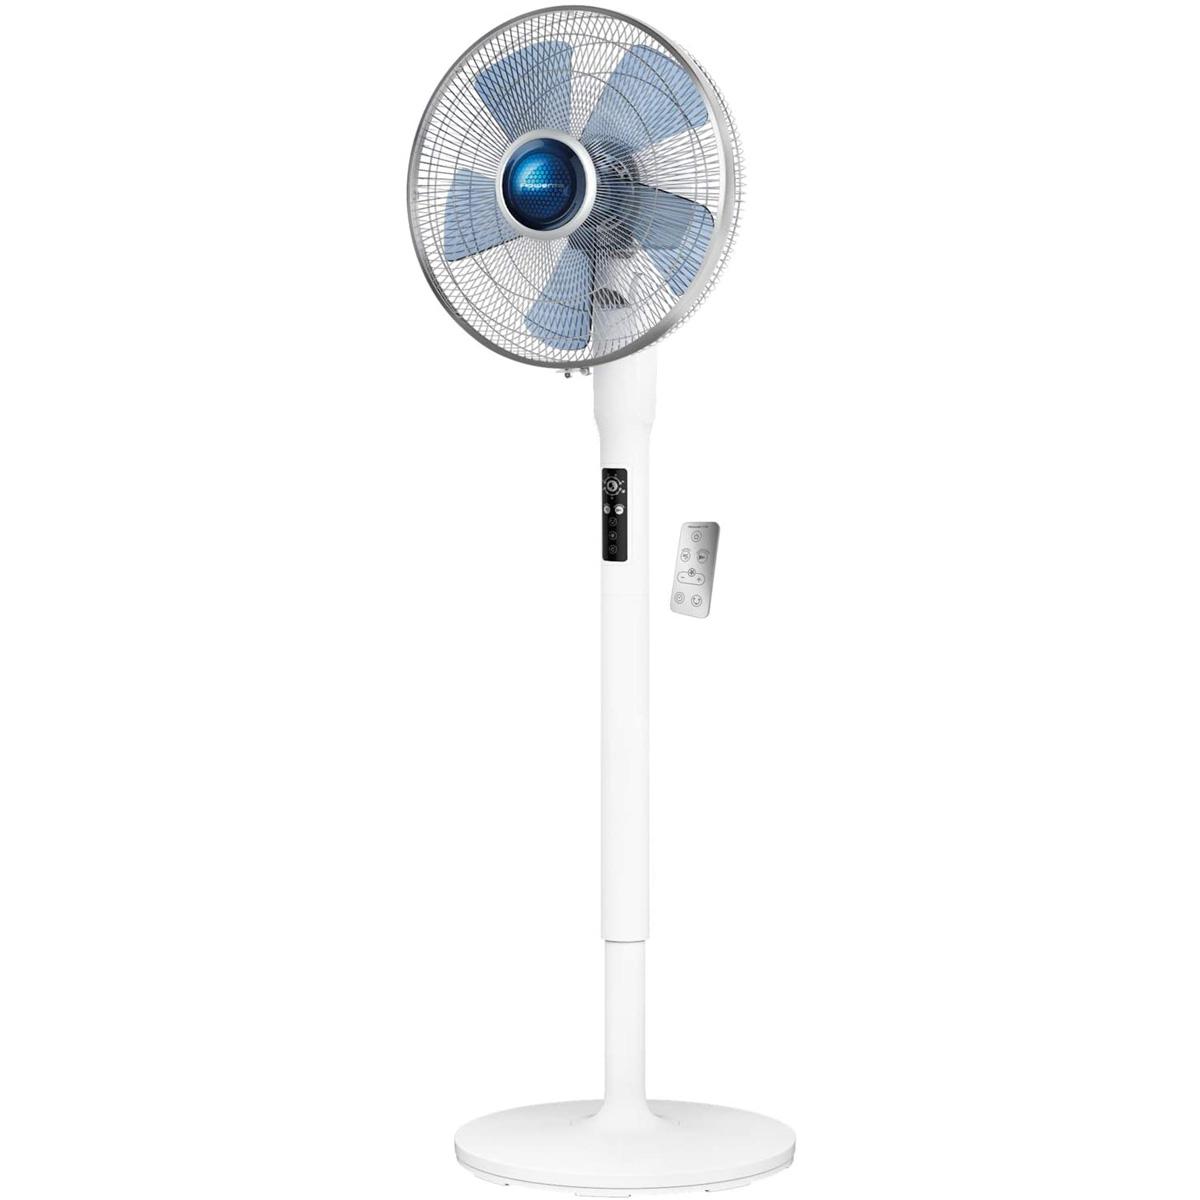 Rowenta Turbo Silence Extreme+ Stand Fan for $111.99 Shipped